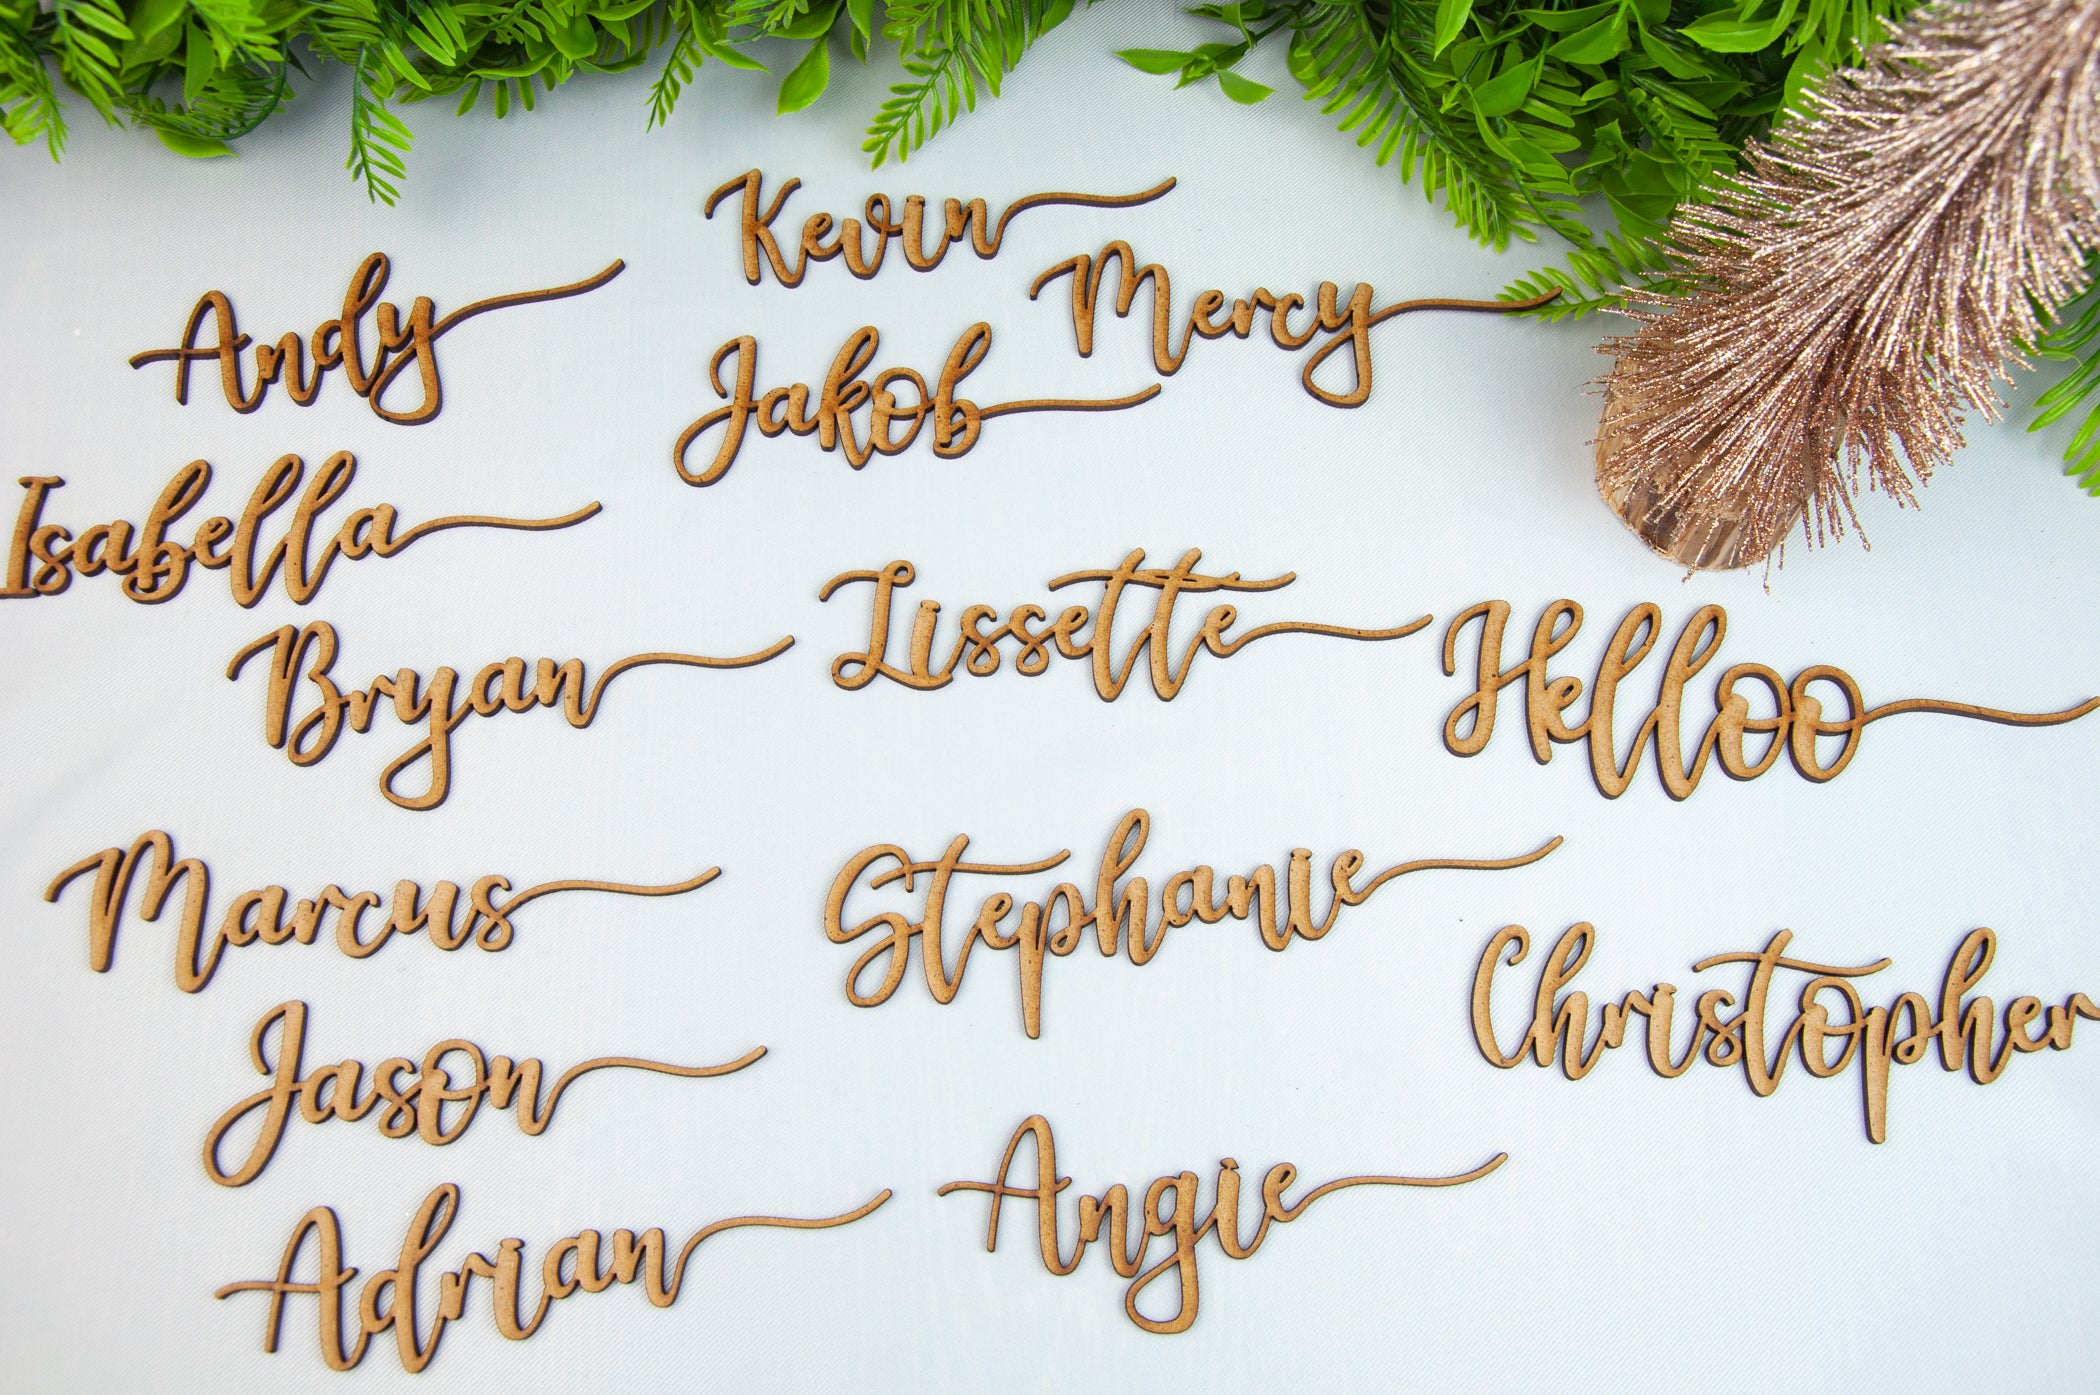 WOODEN LASER CUT NAMES PLACE SETTINGS NAMES FOR WEDDING